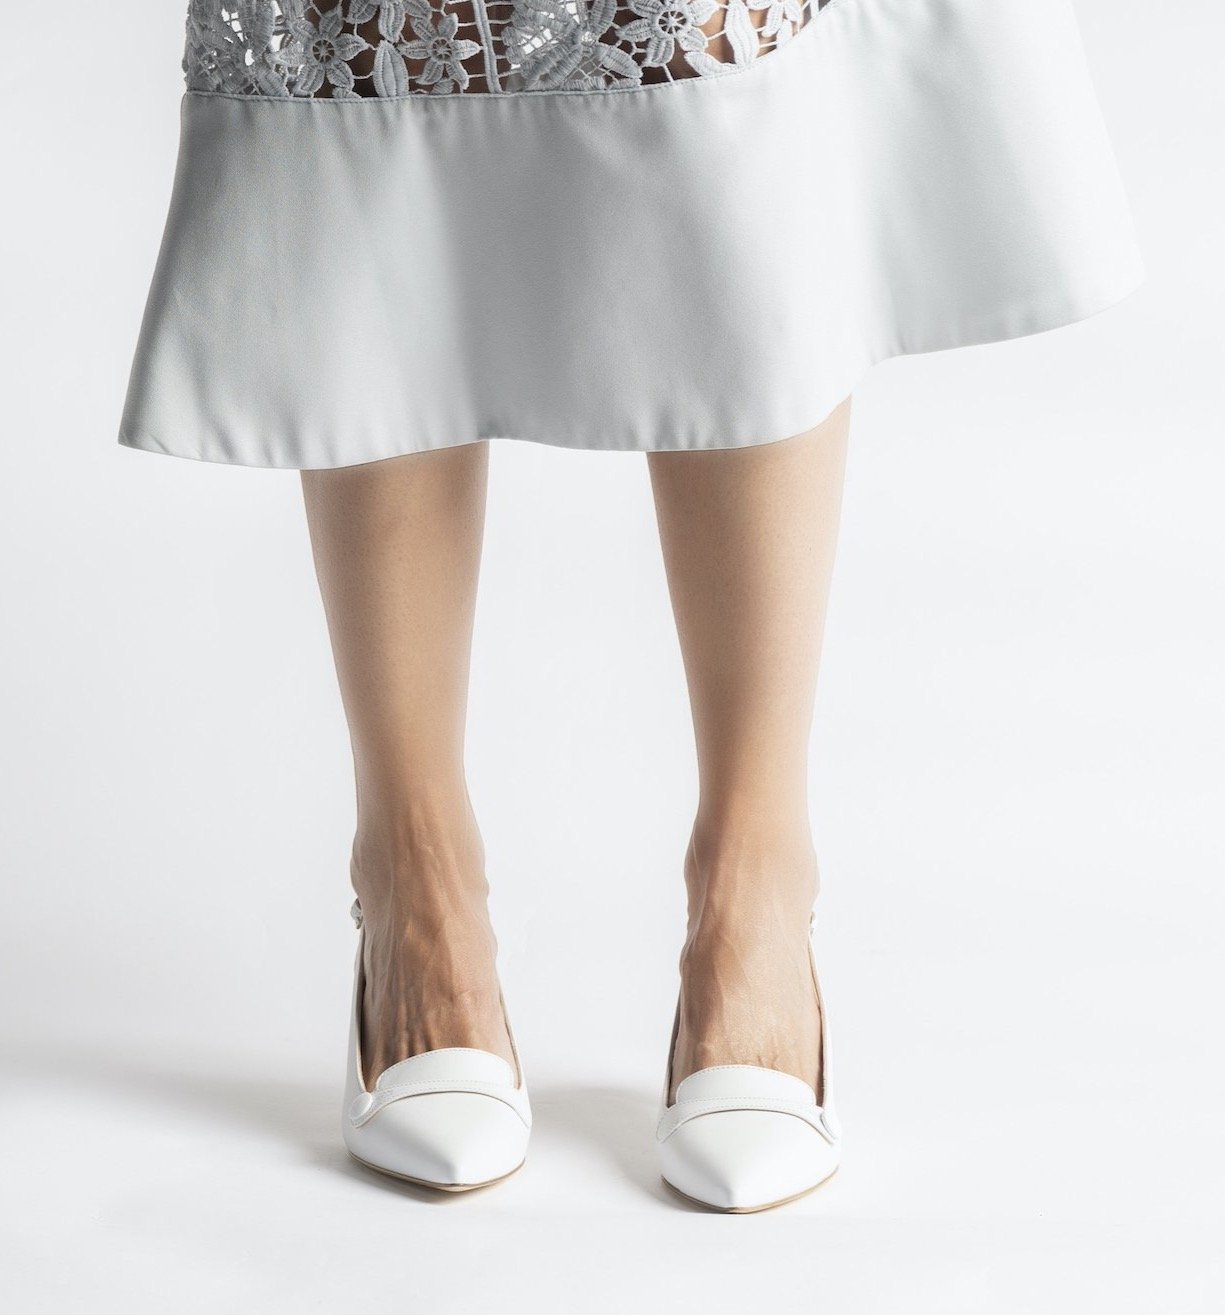 Capretto Sling Back Shoes In White Heels - 6